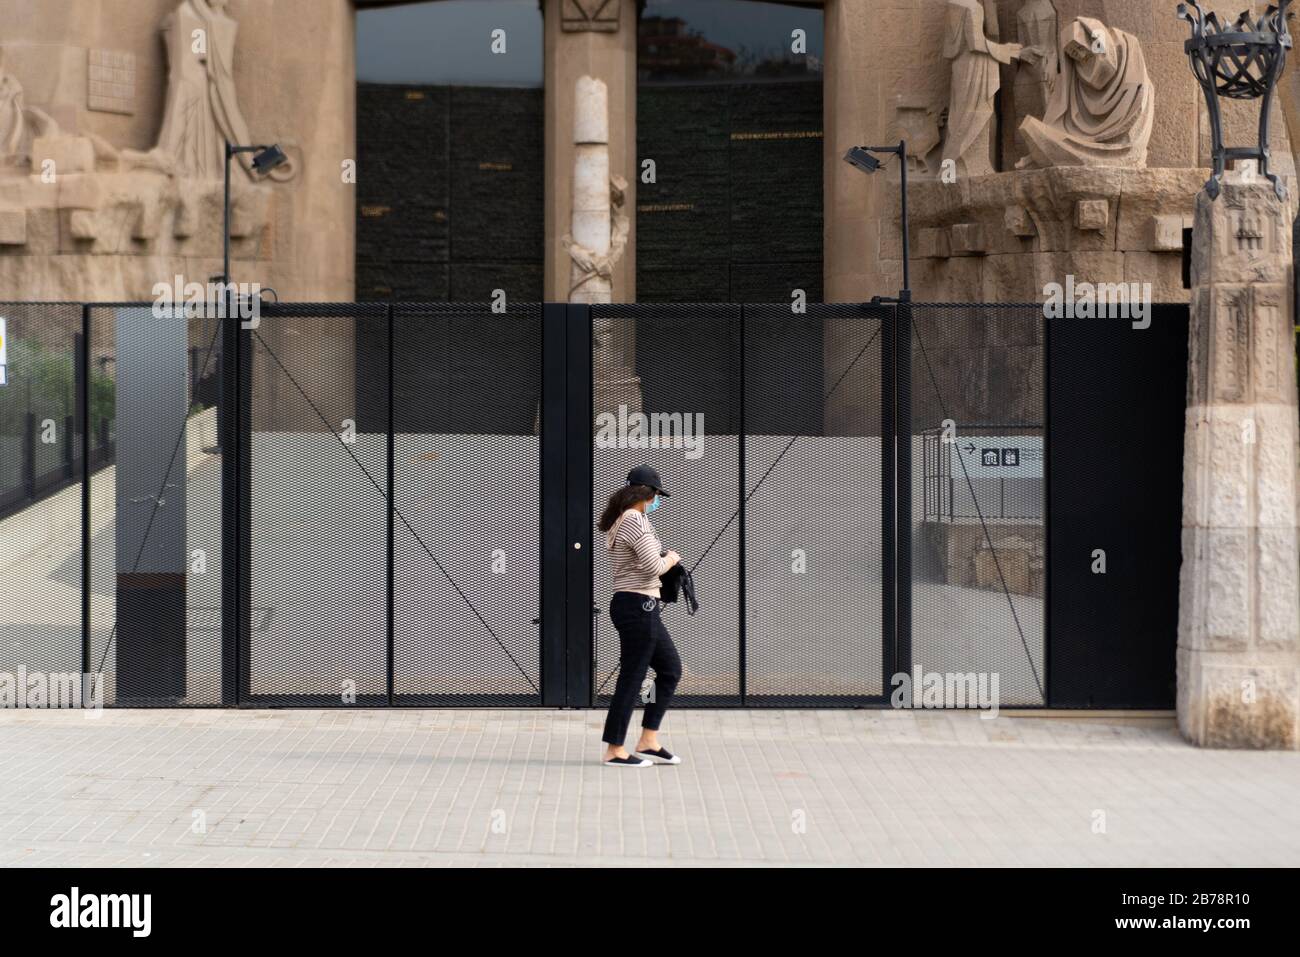 Barcelona, Spain - 14 march 2020: an asian woman walking by the sagrada familia monument wearing protective face mask during the corona virus outbreak Stock Photo